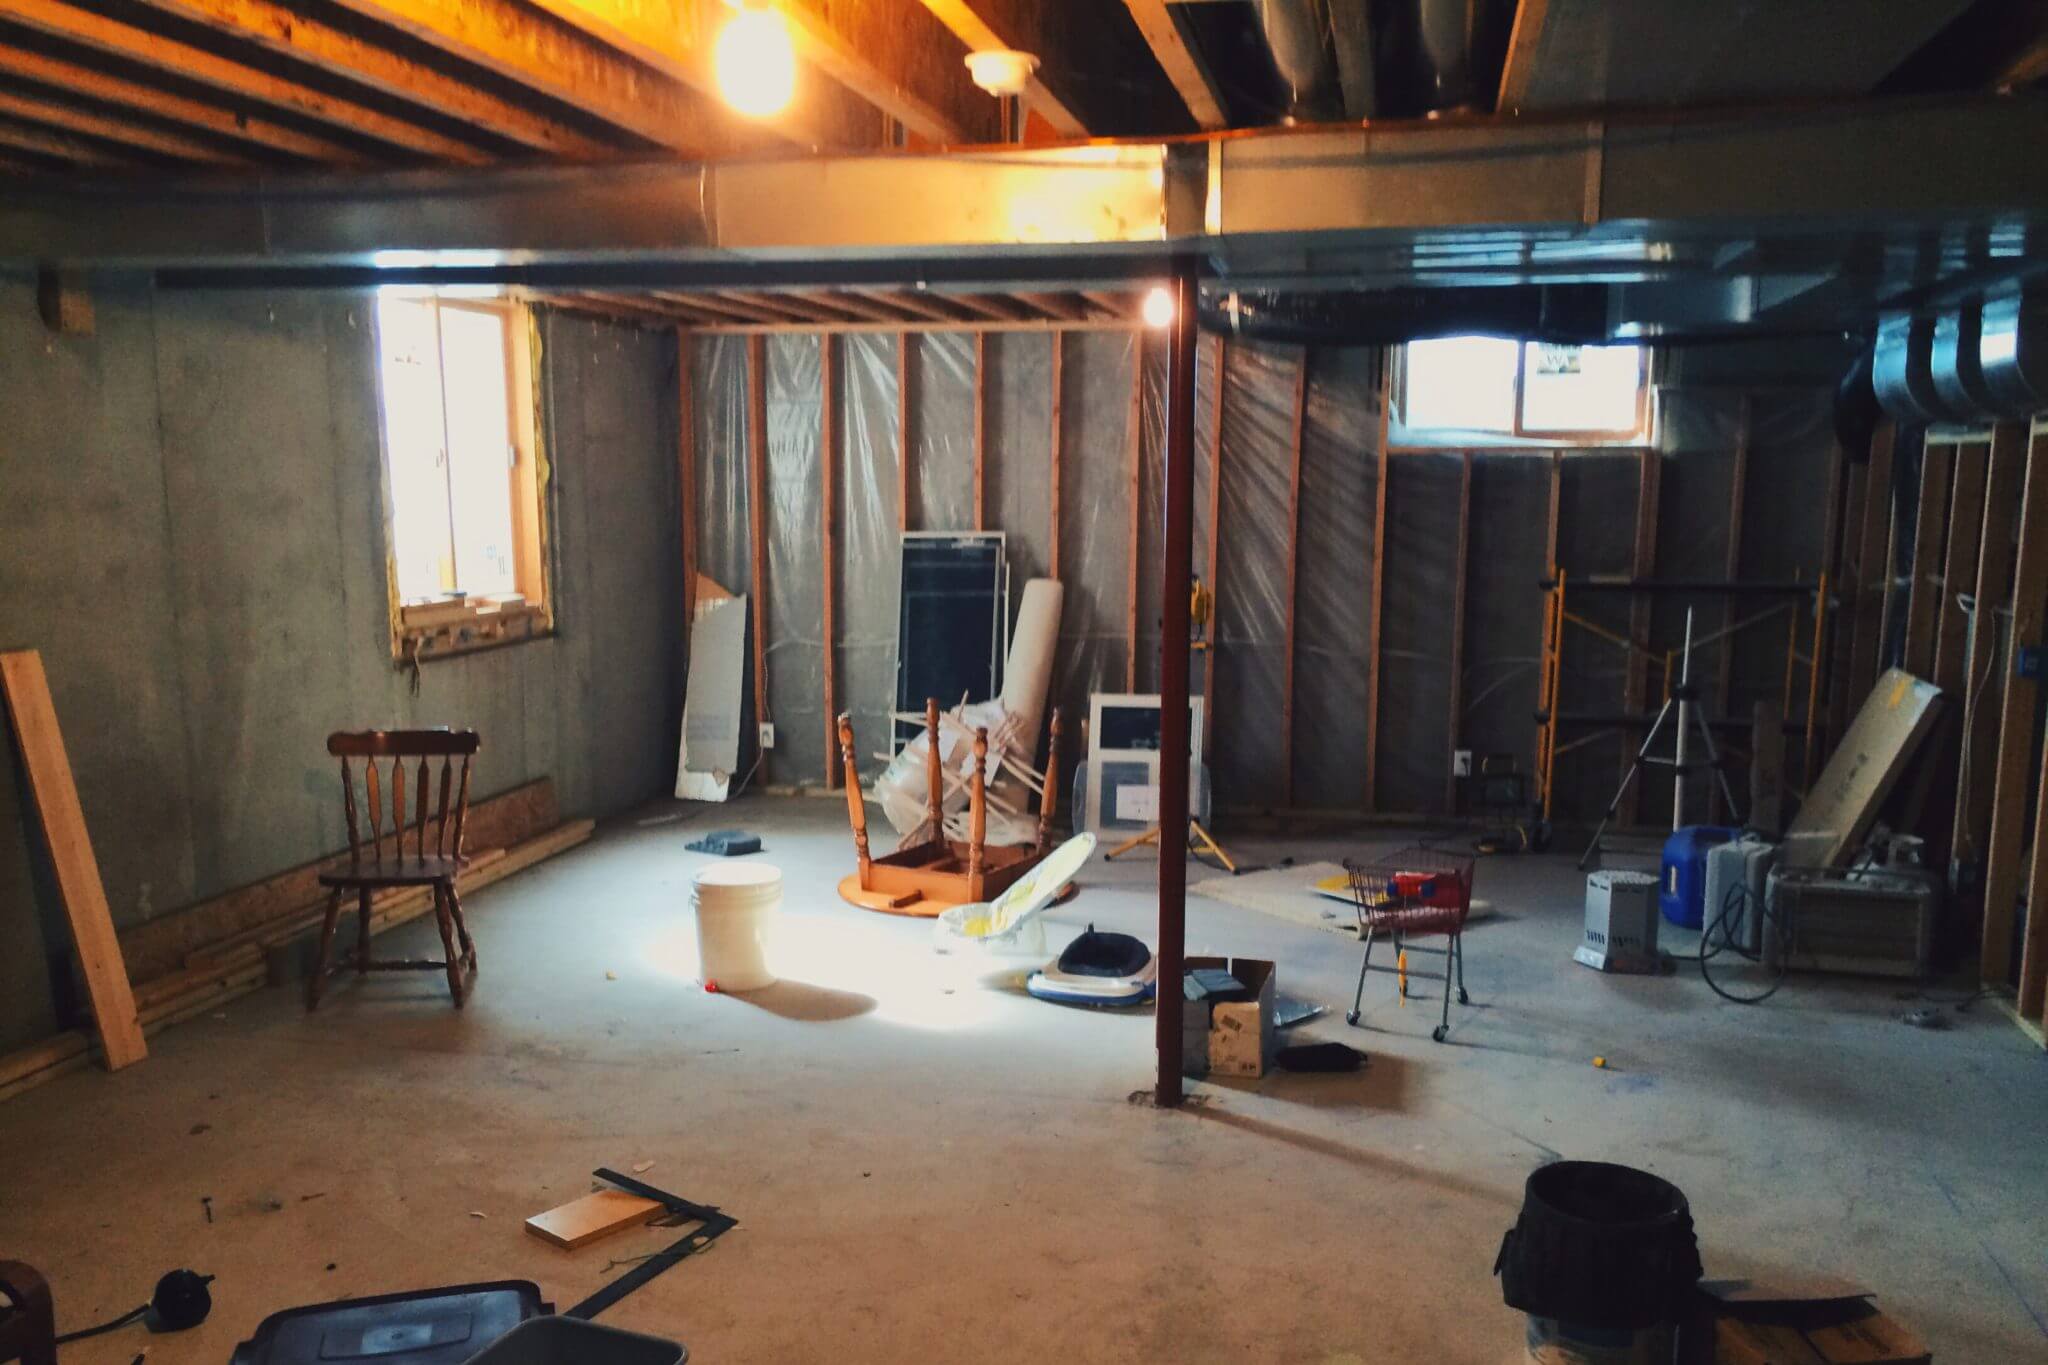 The unfinished basement